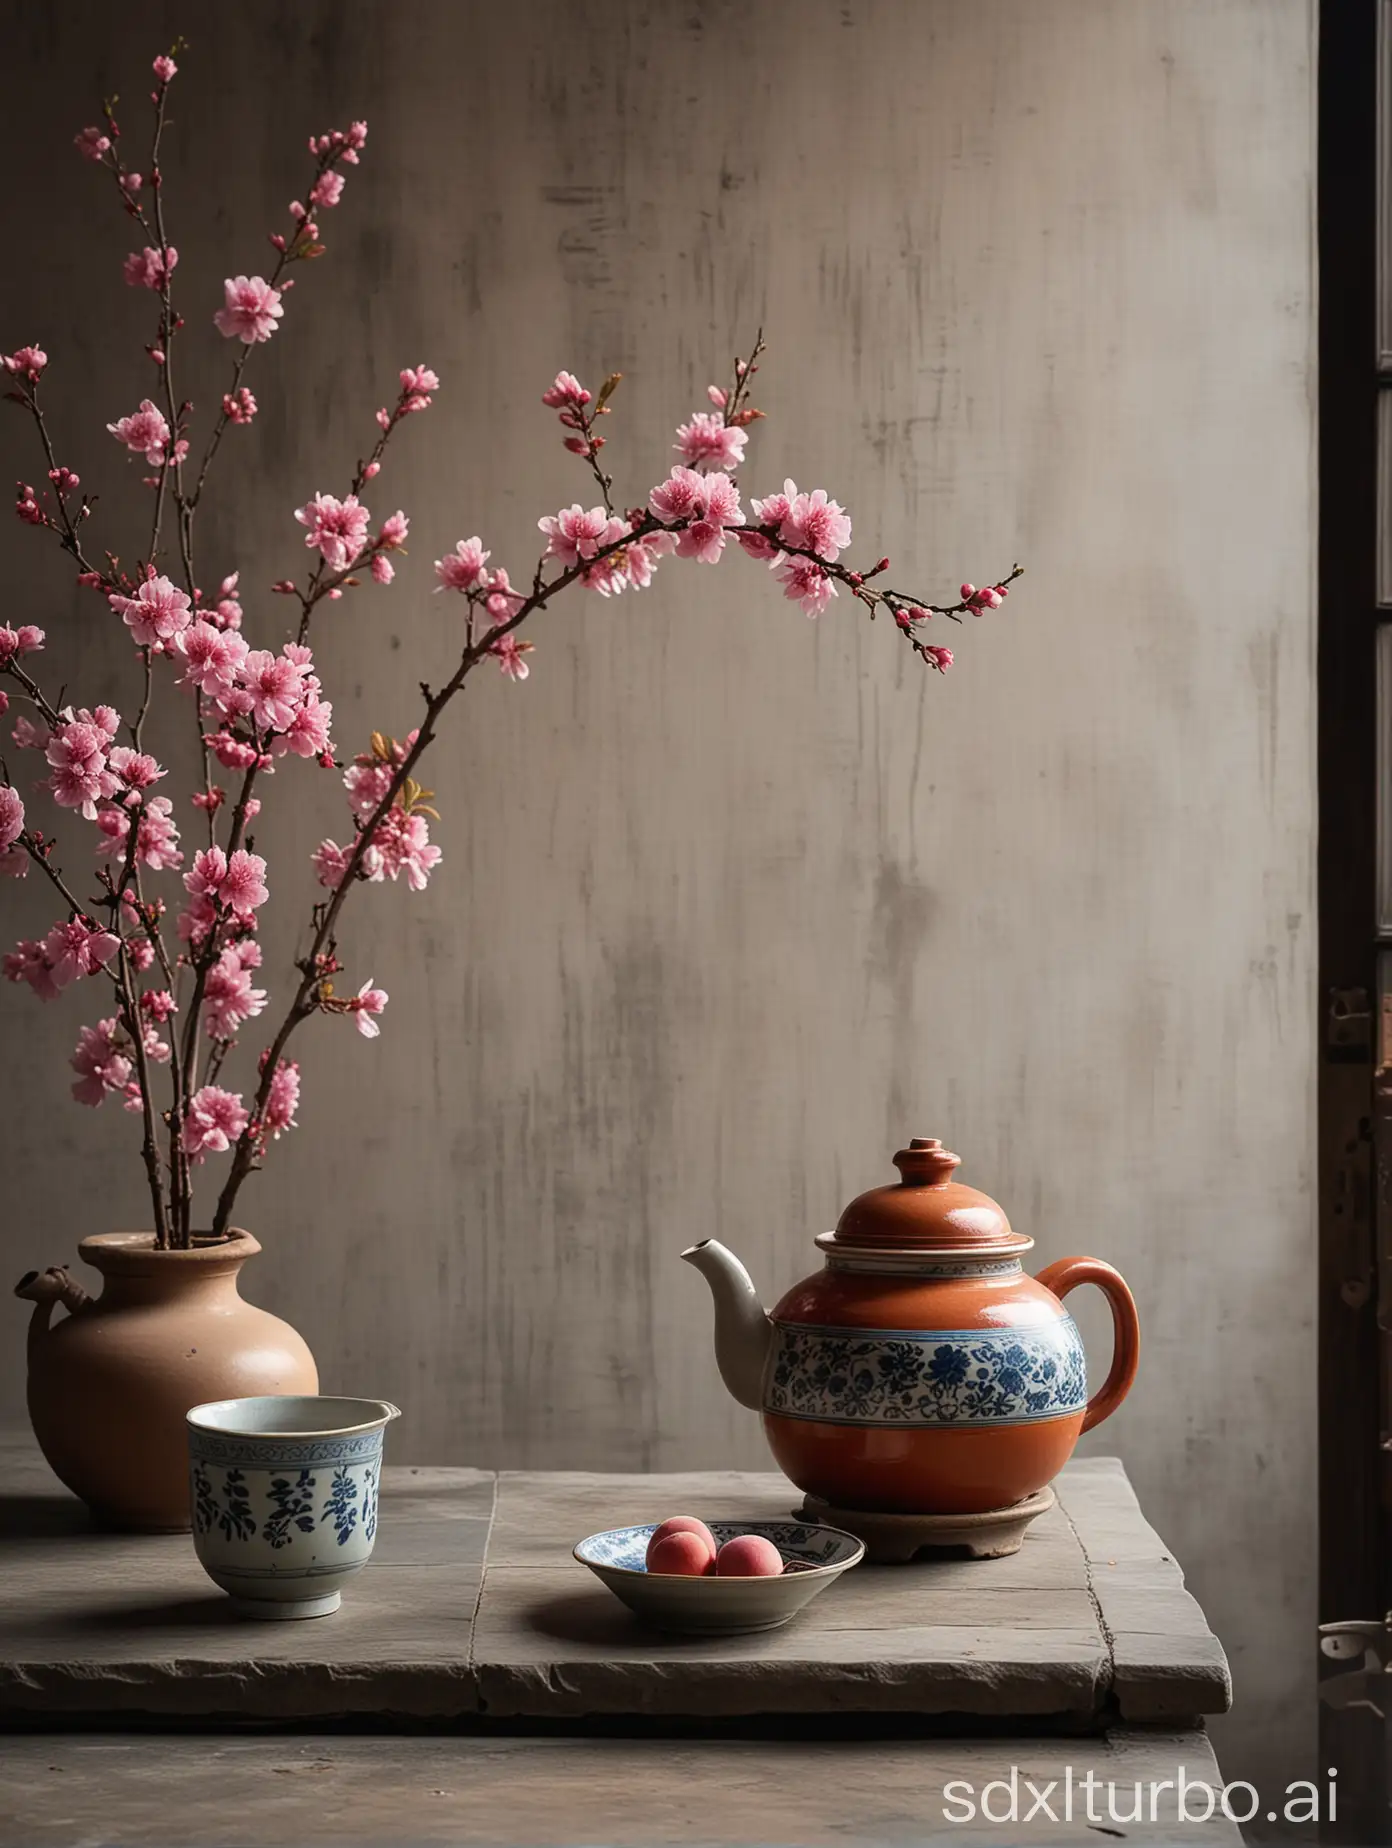 In the ancient town of Jiangnan, there was an old house with gray walls and tiles on the top. There was a small teapot next to it, as well as two flower pots full of blooming peach blossoms in various colors. A bowl filled with tea sat beside them. This scene embodied the style of Chinese photography, showcasing exquisite details and natural light. It captured high-definition images using Canon cameras. In cinematic tones, the images showcased traditional architecture and flowers in the style of traditional Chinese photography.